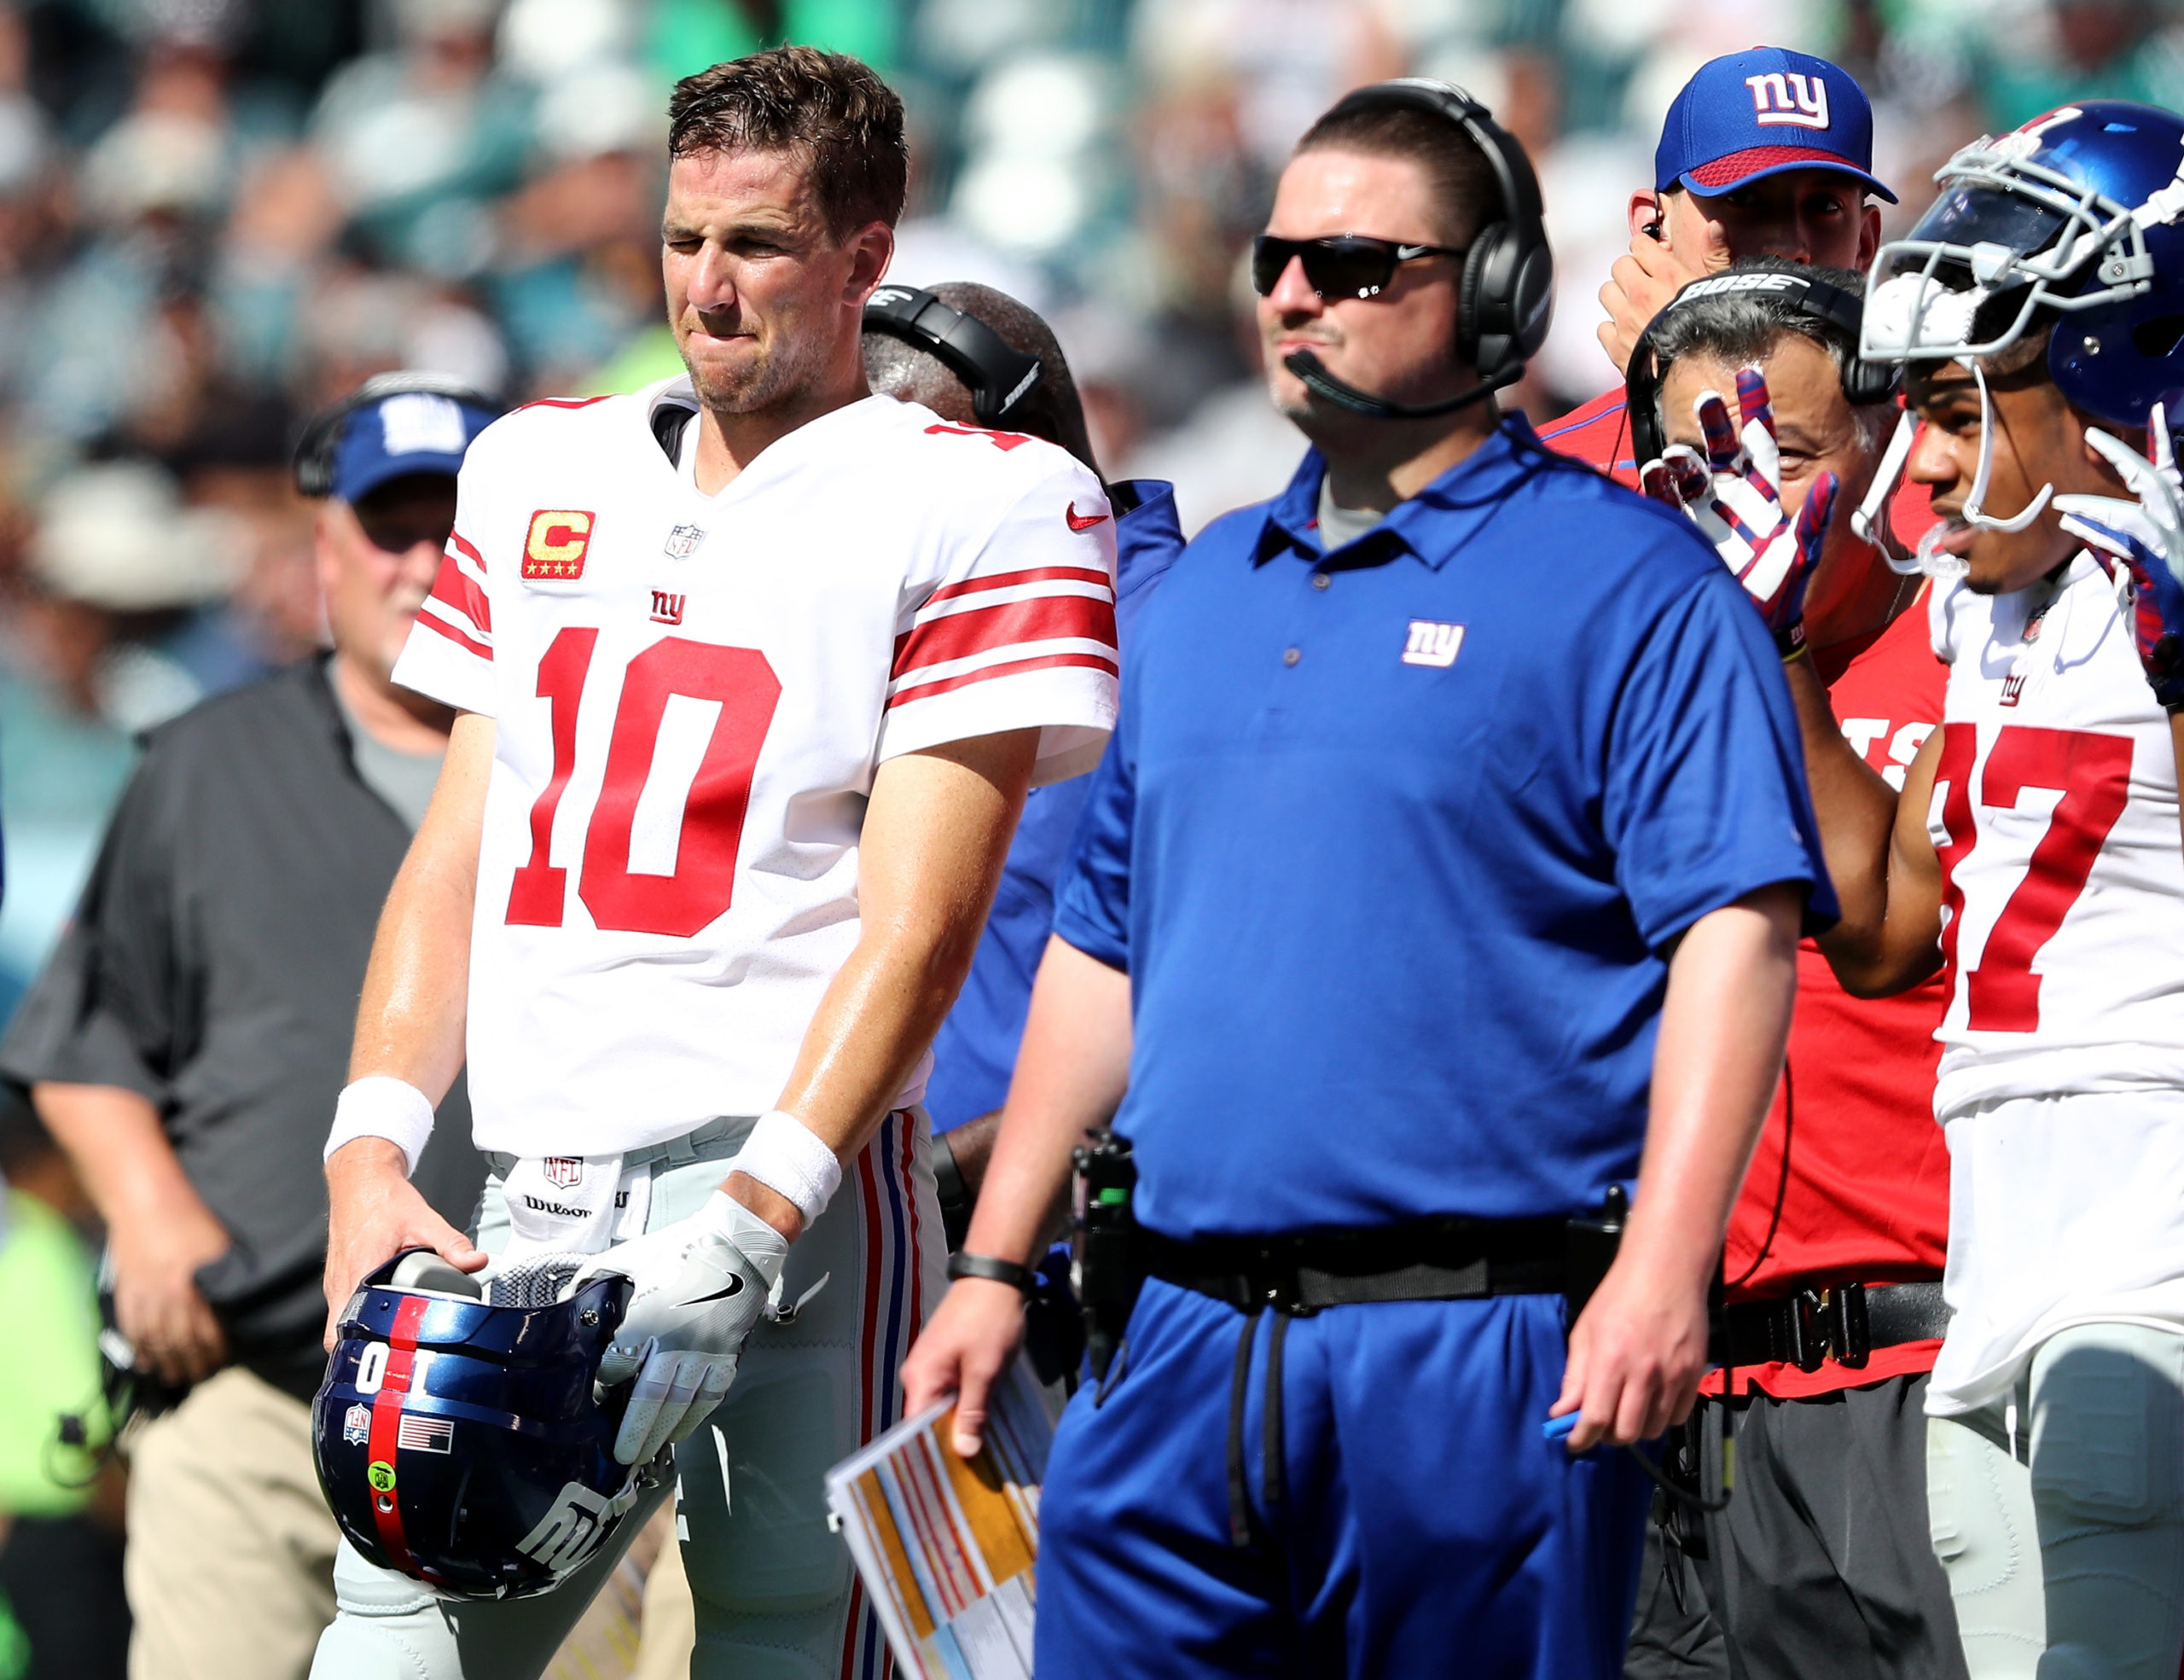 PHILADELPHIA, PA - SEPTEMBER 24: Eli Manning #10 of the New York Giants and head coach Ben McAdoo wait for the review on a touchdown scored in the second quarter by the New York Giants on September 24, 2017 at Lincoln Financial Field in Philadelphia, Pennsylvania.The touchdown was called back and the New York Giants did not score on the possession against the Philadelphia Eagles. Elsa/Getty Images